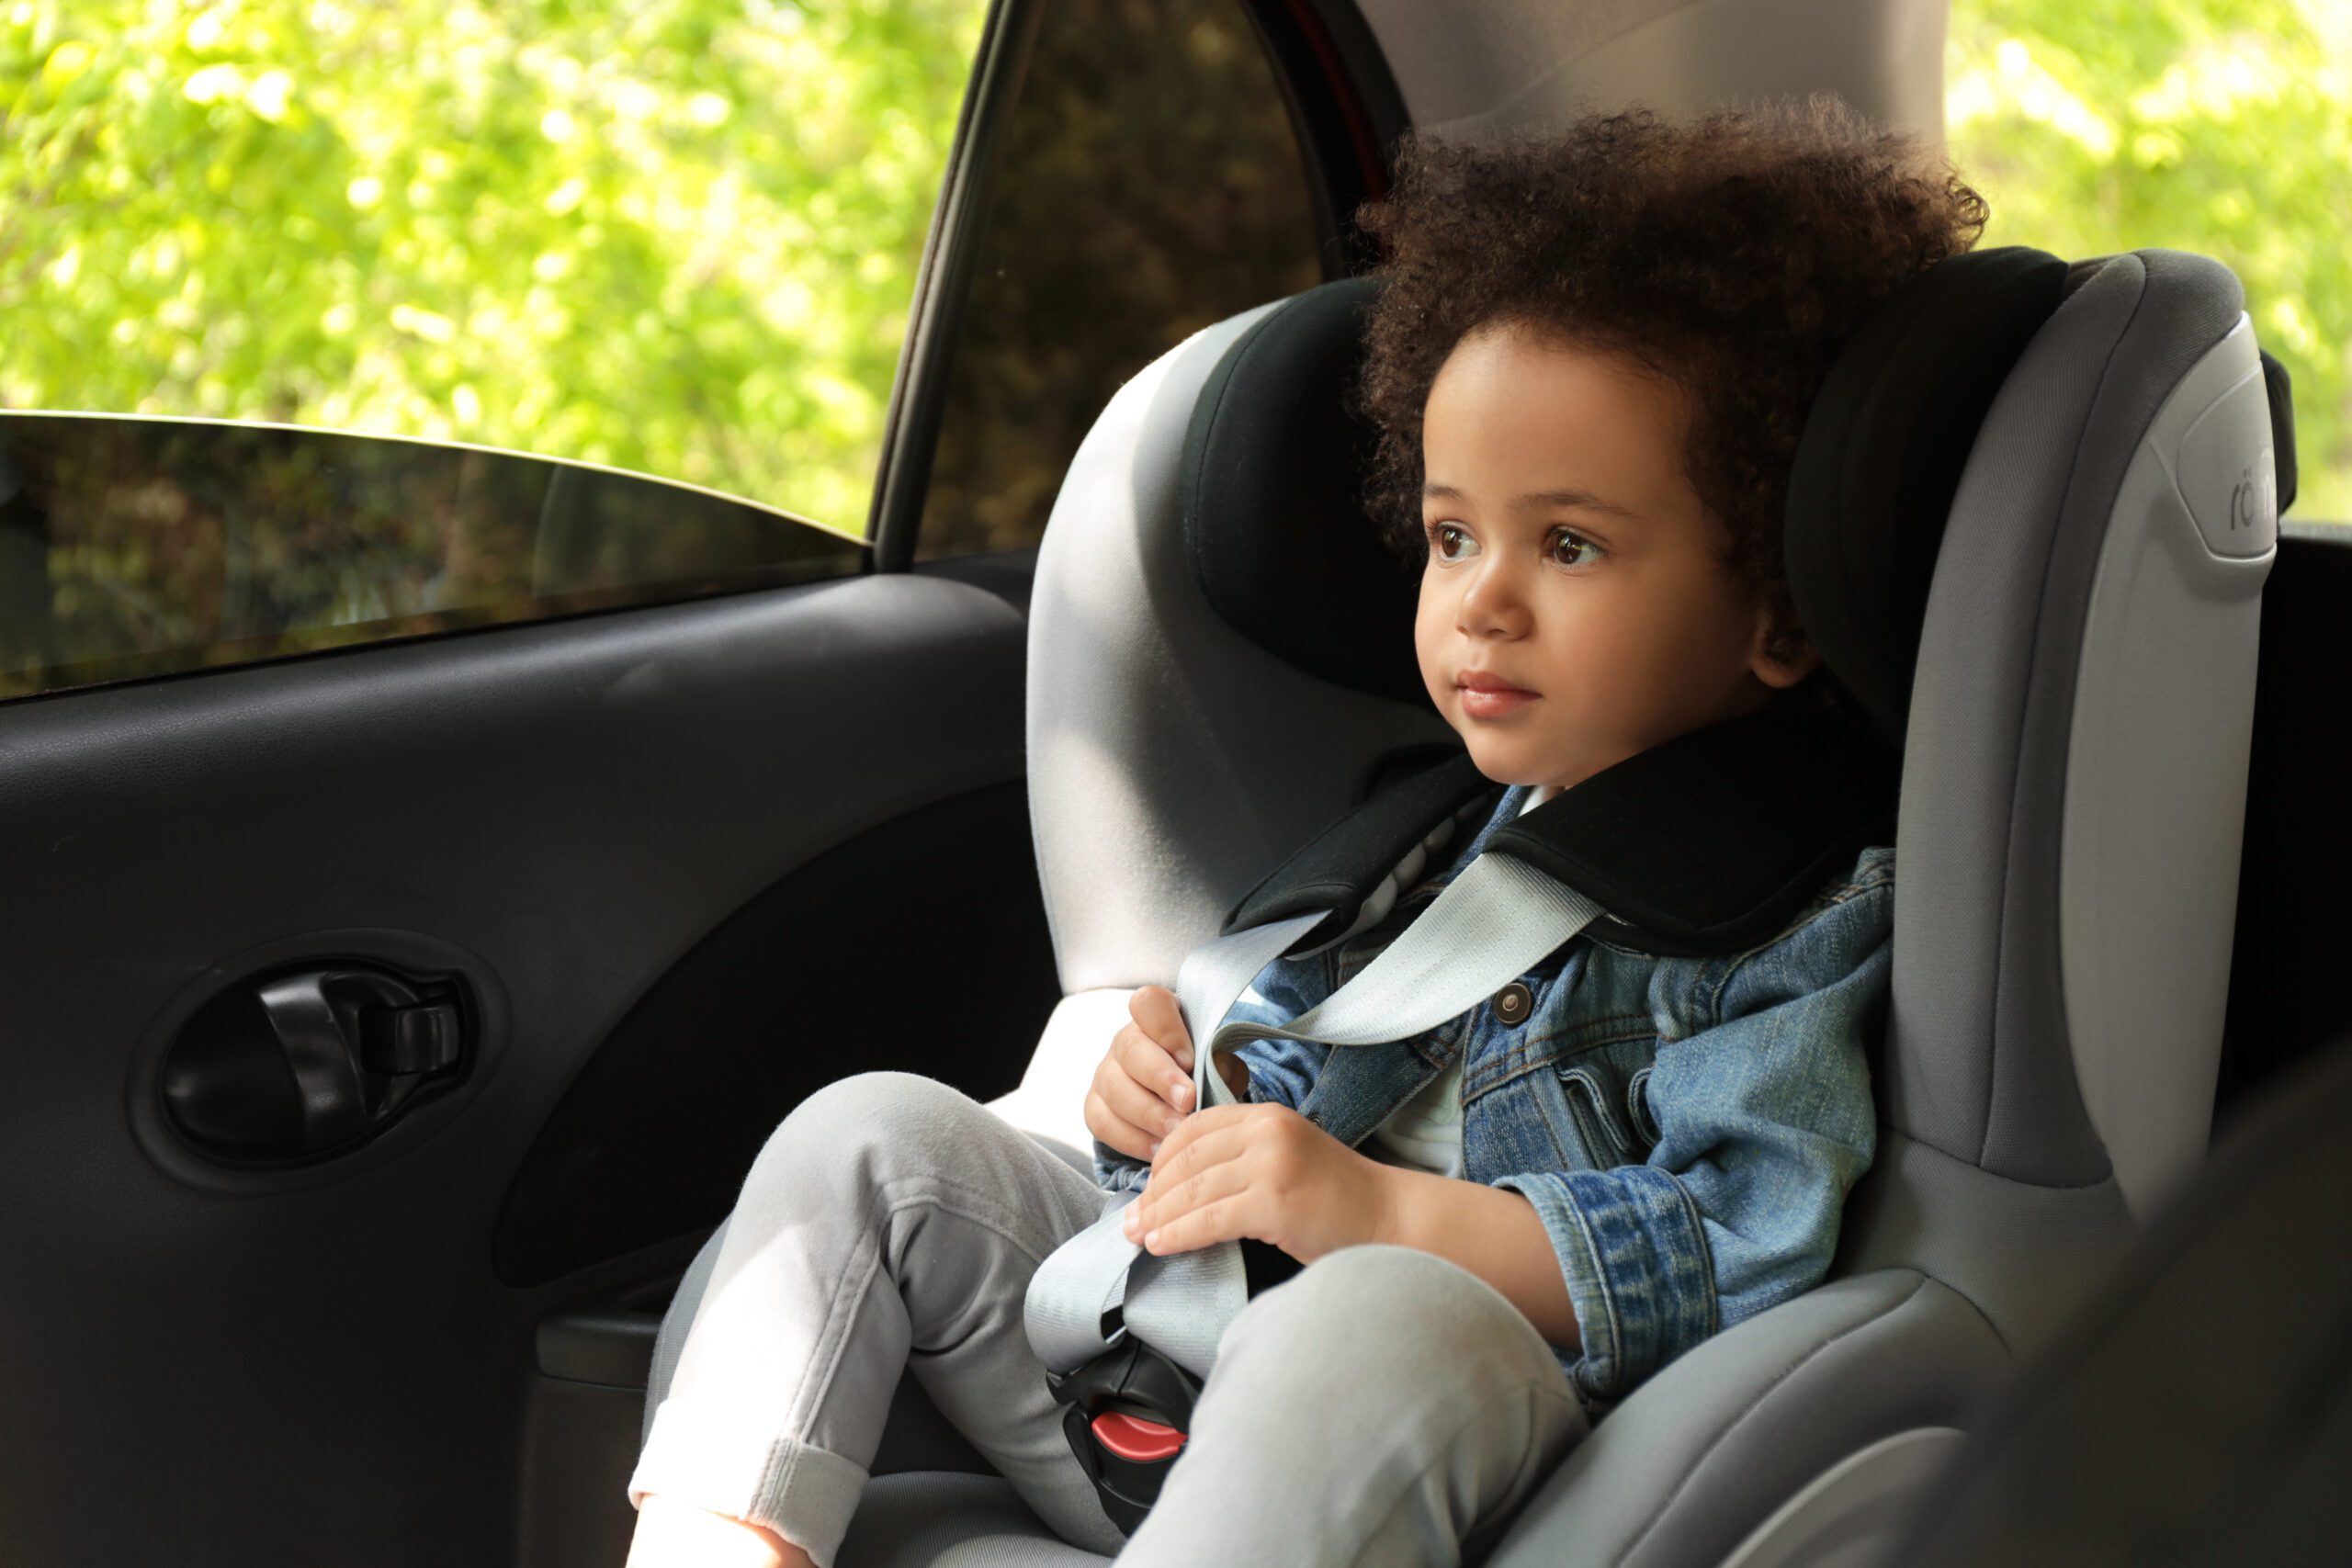 Child Safety Car Seat Reminders For Parents